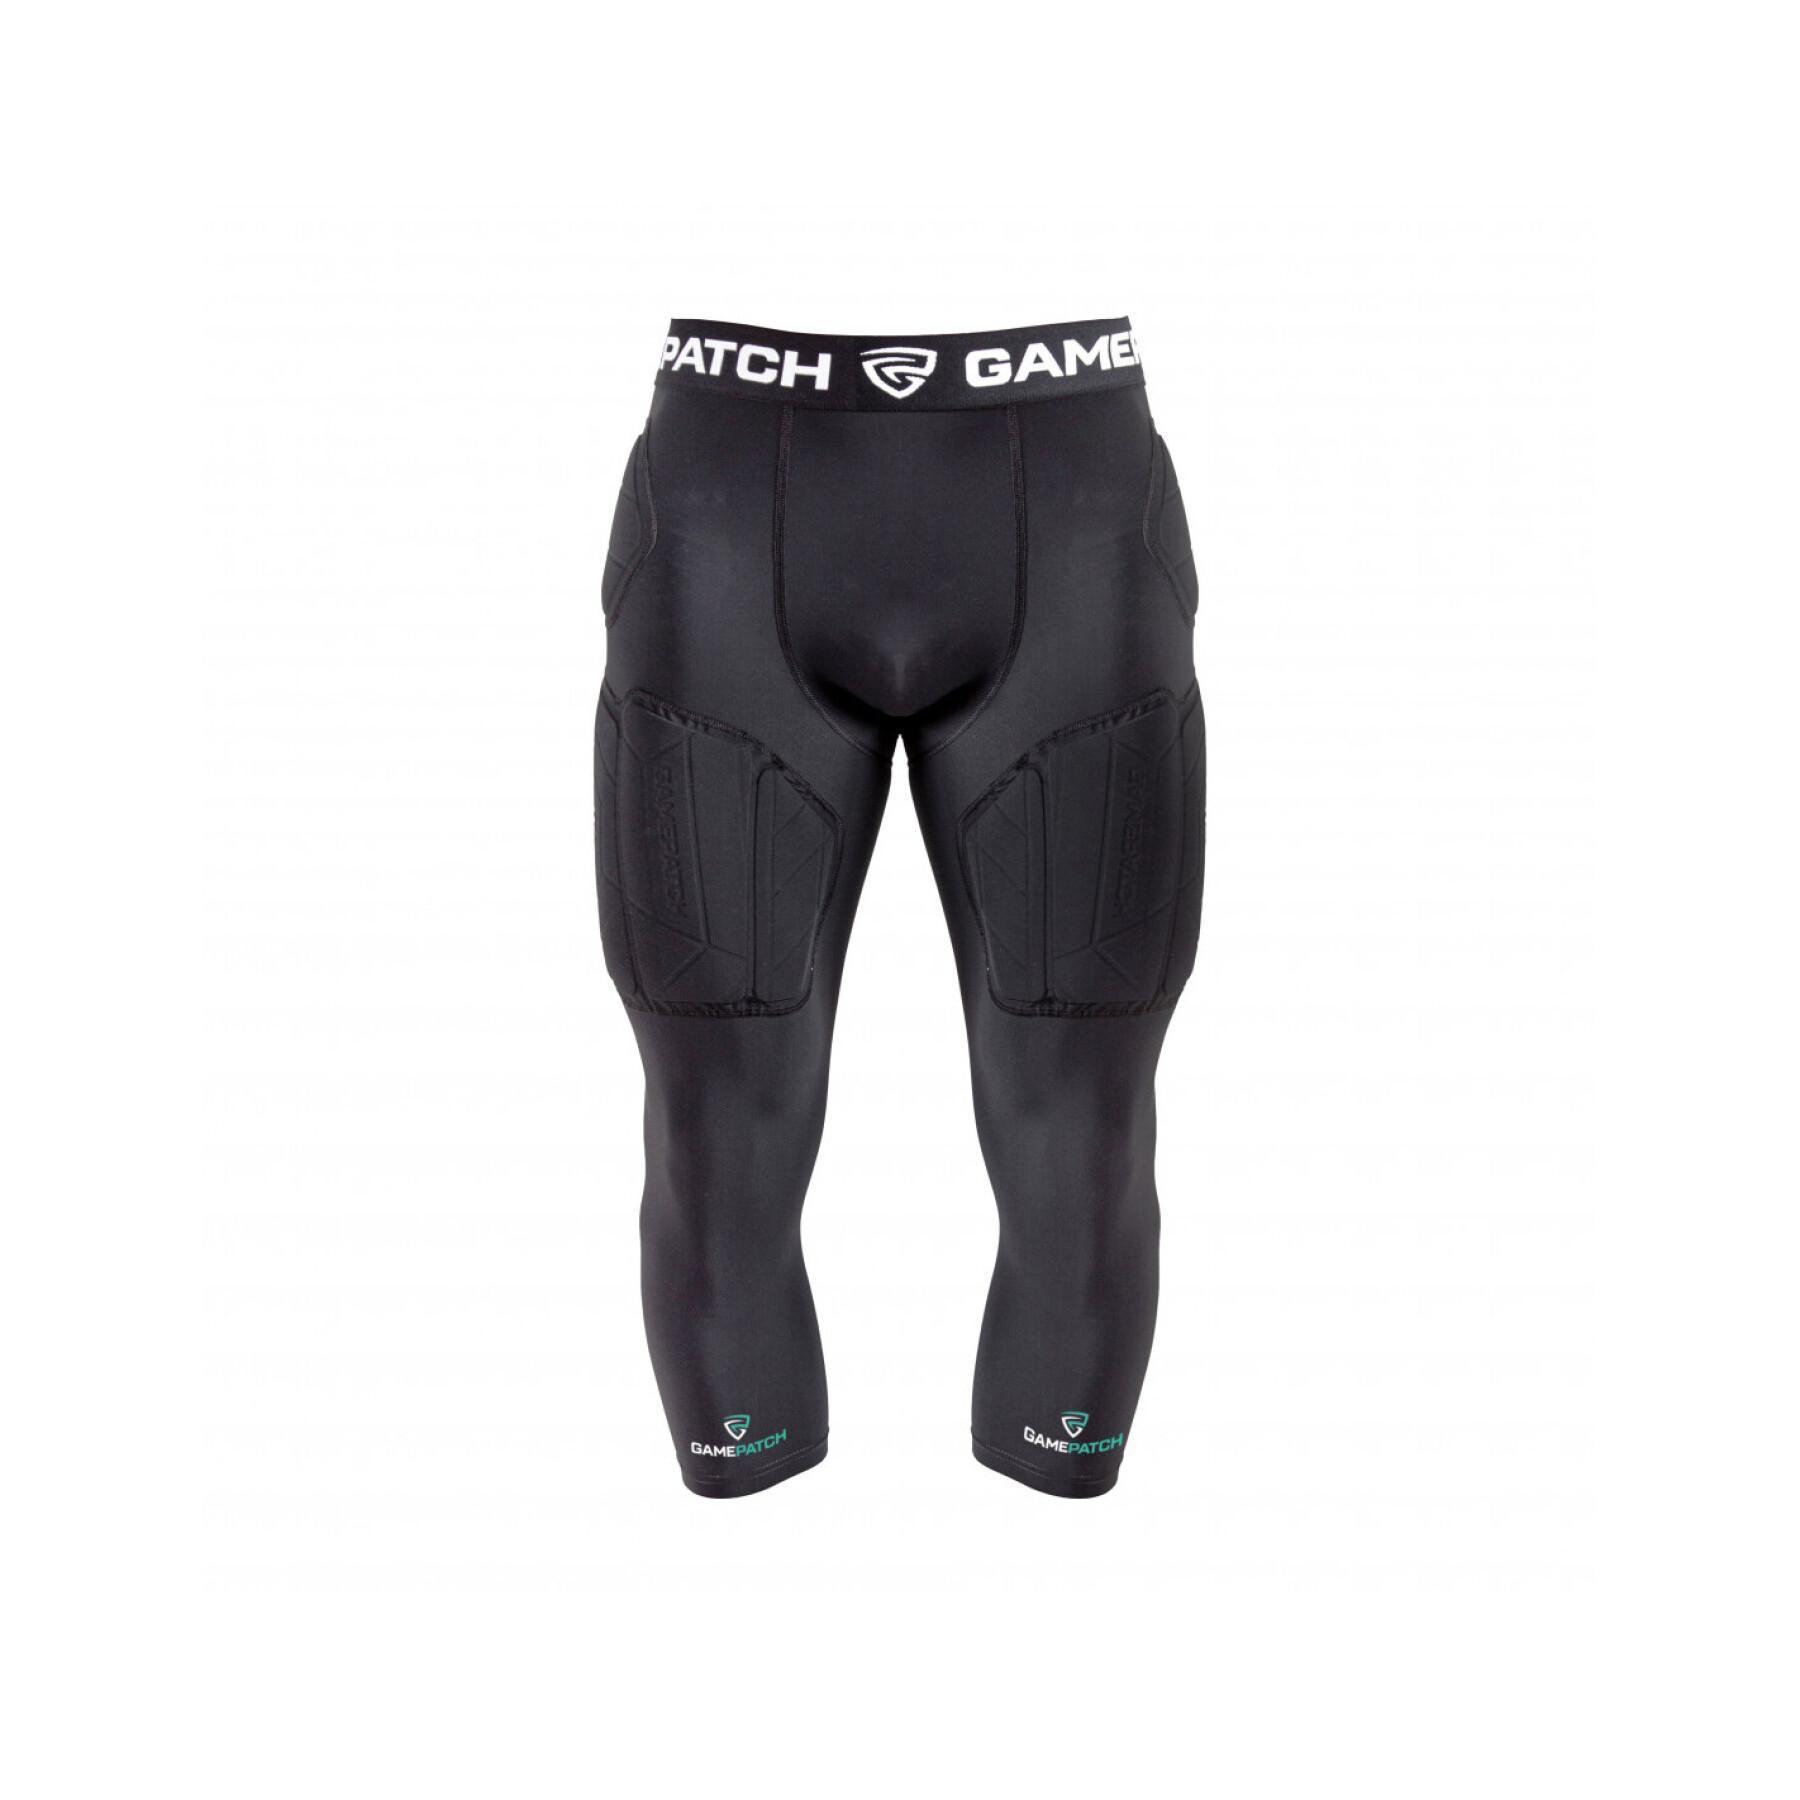 Compression pants Game-Patch Pro+